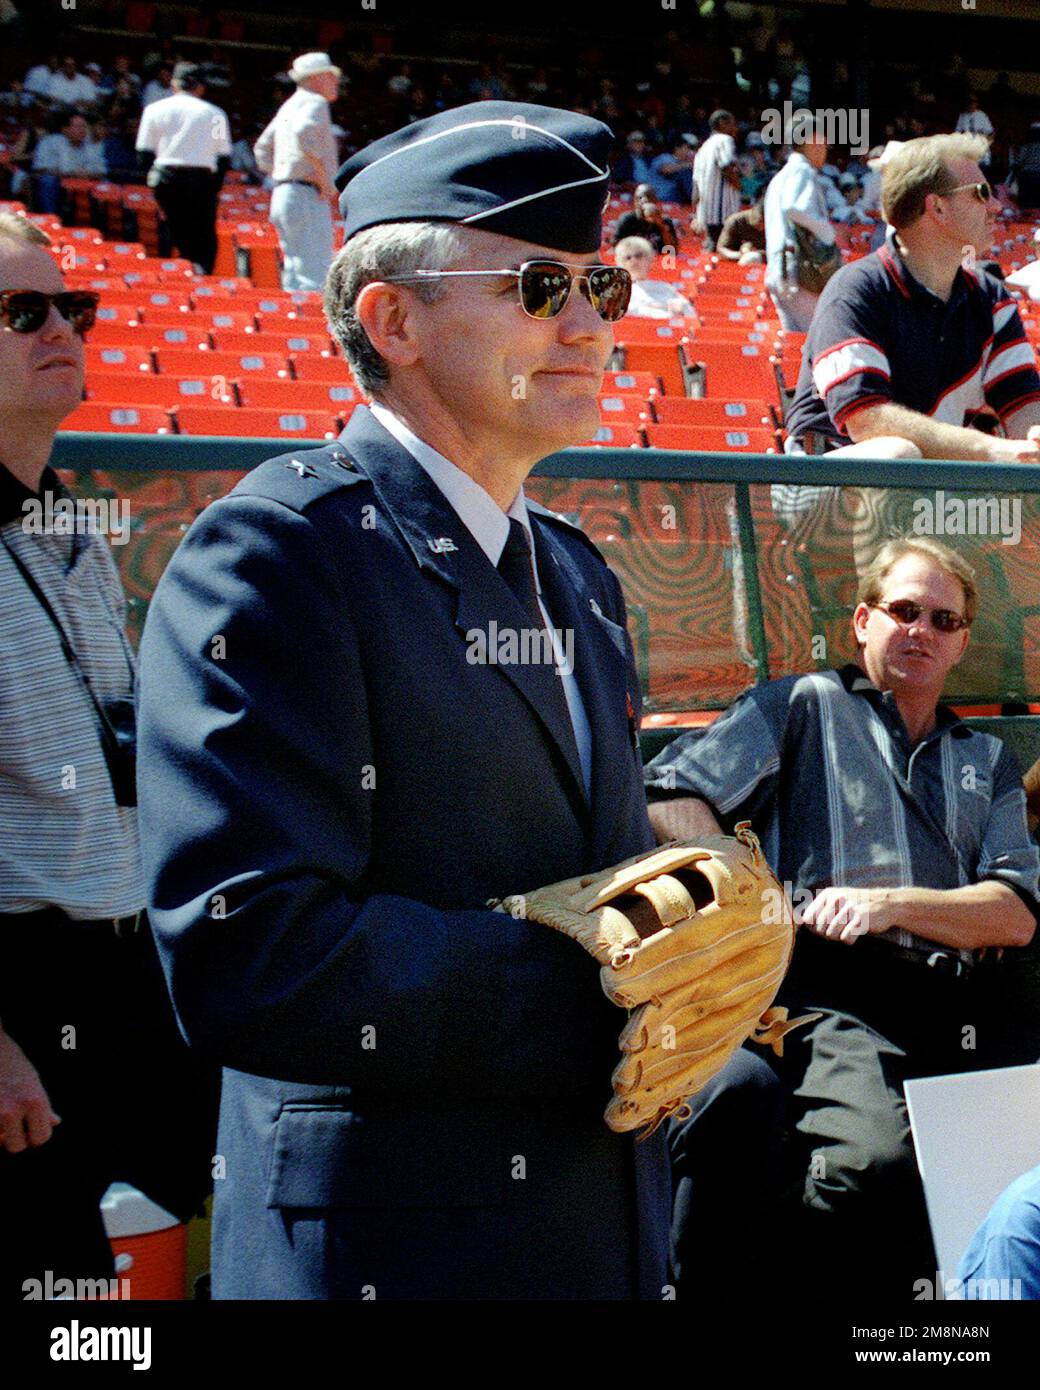 Medium shot, right front view, Brigadier General Steven A. Roser, USAF, commander of the 60th Air Mobility Wing at Travis AFB, Ca., prepares to throw out the first pitch at Travis Day at Oakland Coliseum, Oakland, California during the Oakland A's game. General Roser had given the oath to approximately 20 people enlisting in the Air Force out on the ballfield. Base: Travis Air Force Base State: California (CA) Country: United States Of America (USA) Stock Photo